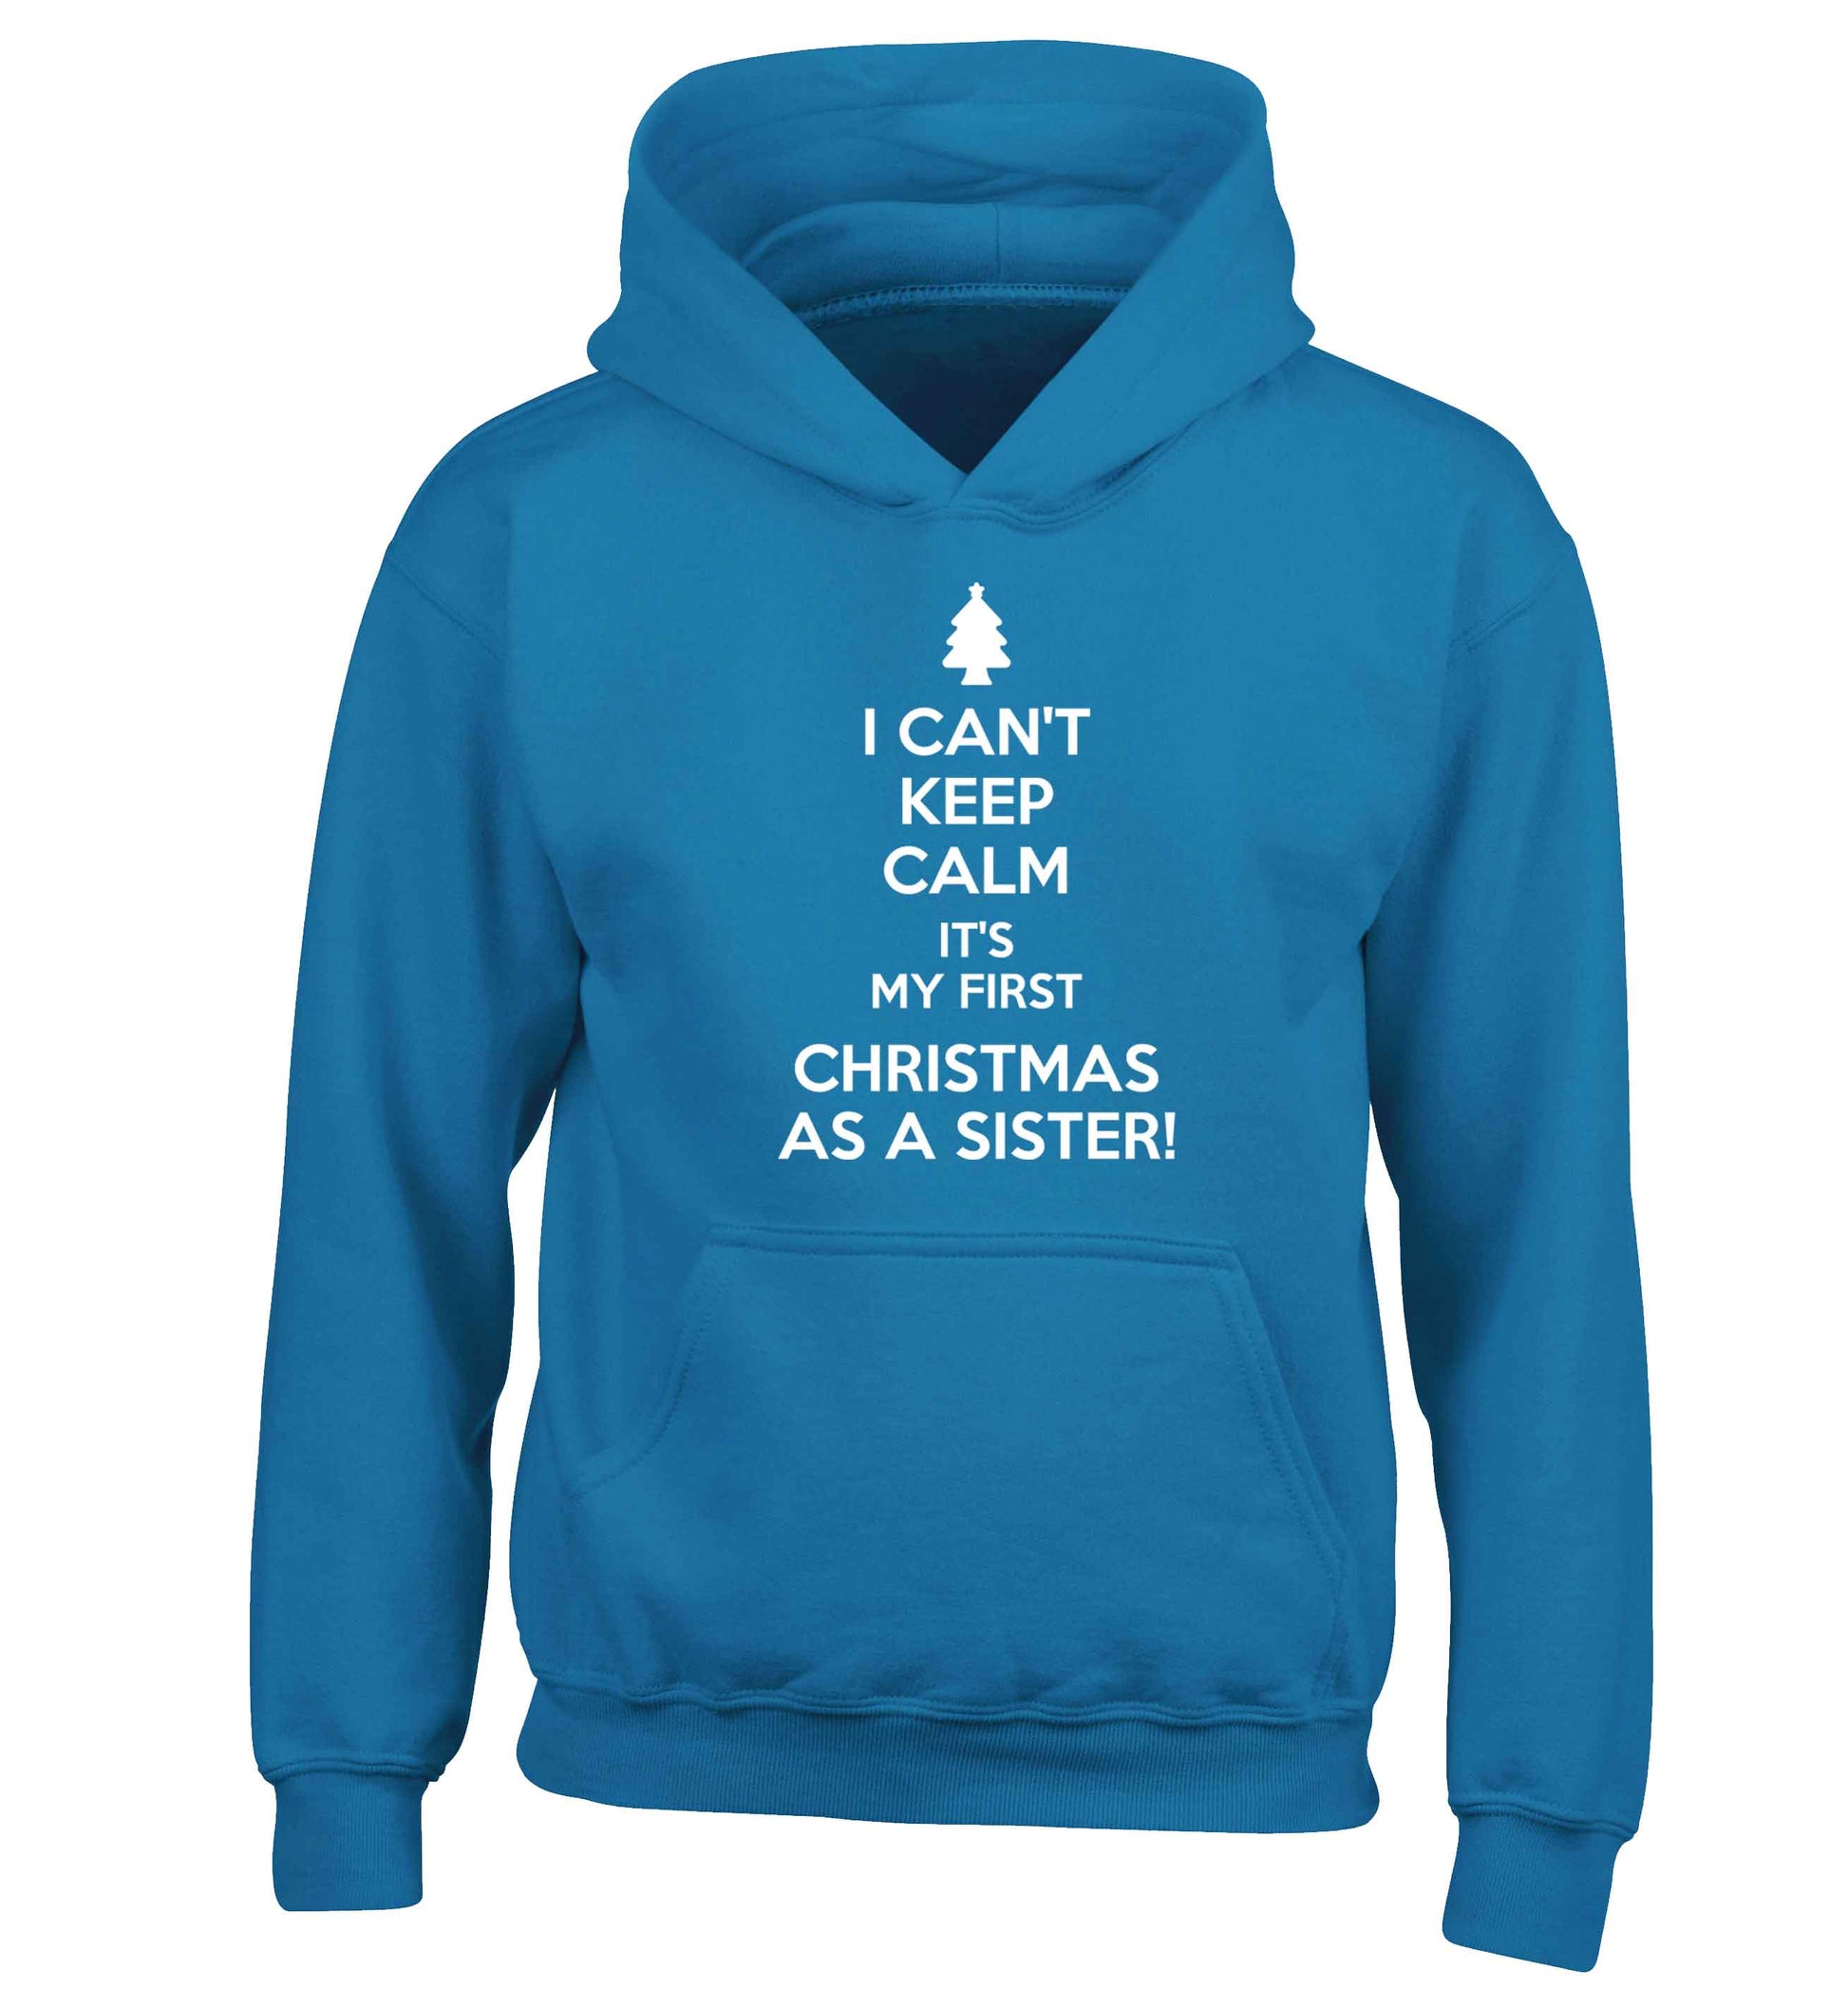 I can't keep calm it's my first Christmas as a sister! children's blue hoodie 12-13 Years